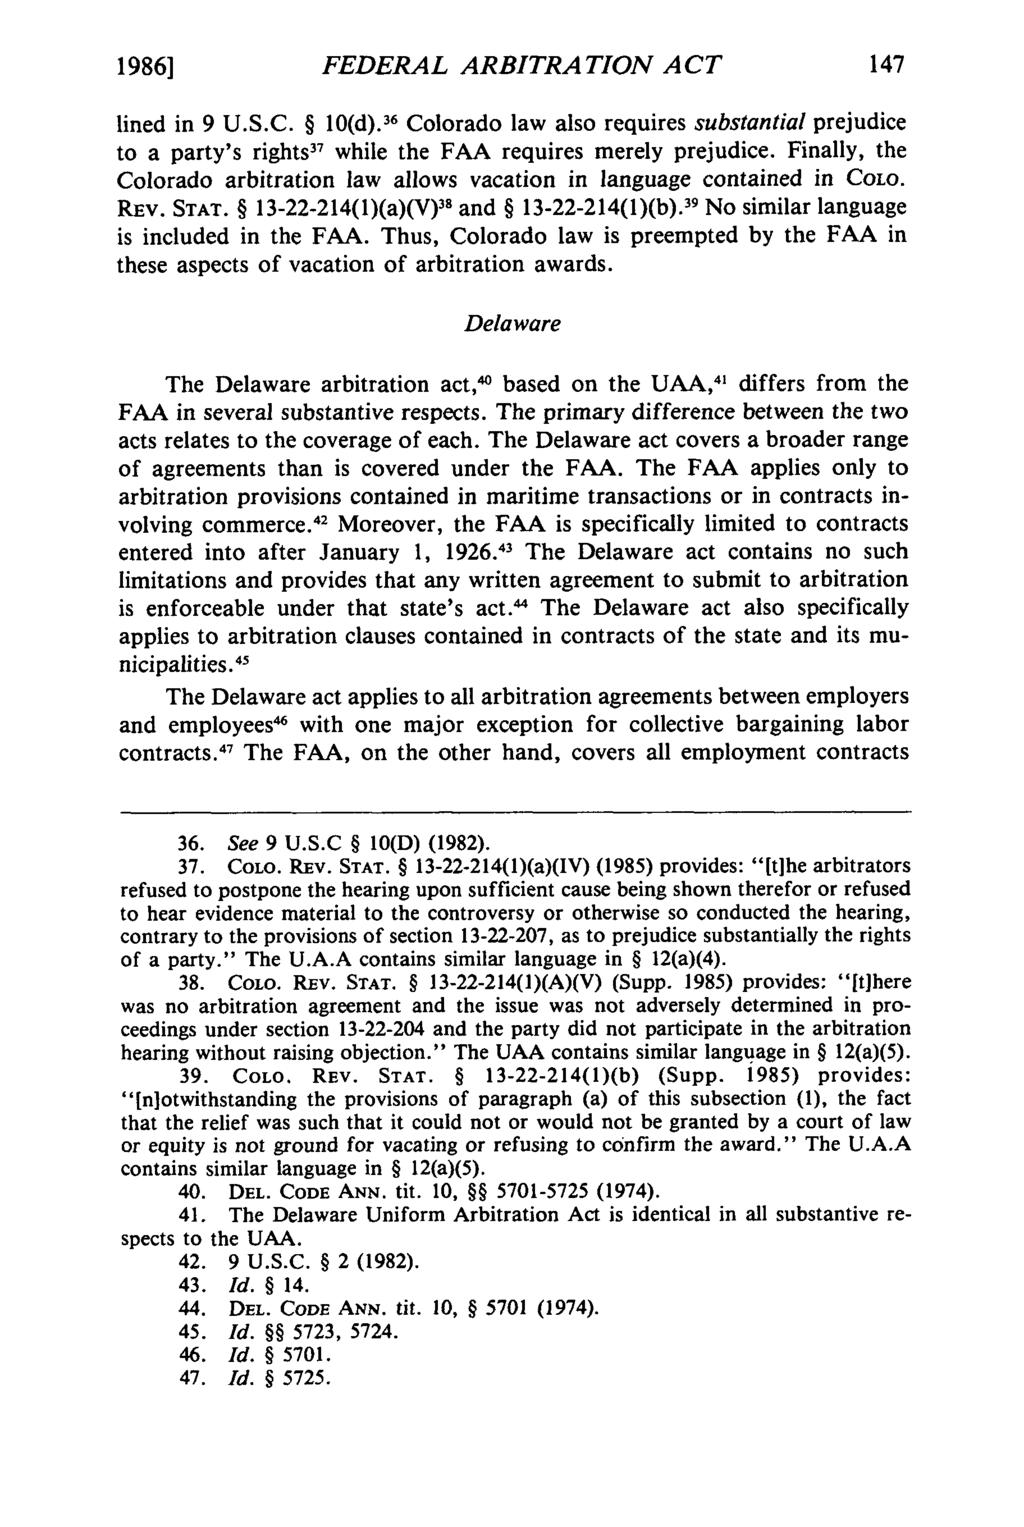 19861 FEDERAL et al.: Federal Arbitration ARBITRATION Act ComparisonACT lined in 9 U.S.C. 10(d).